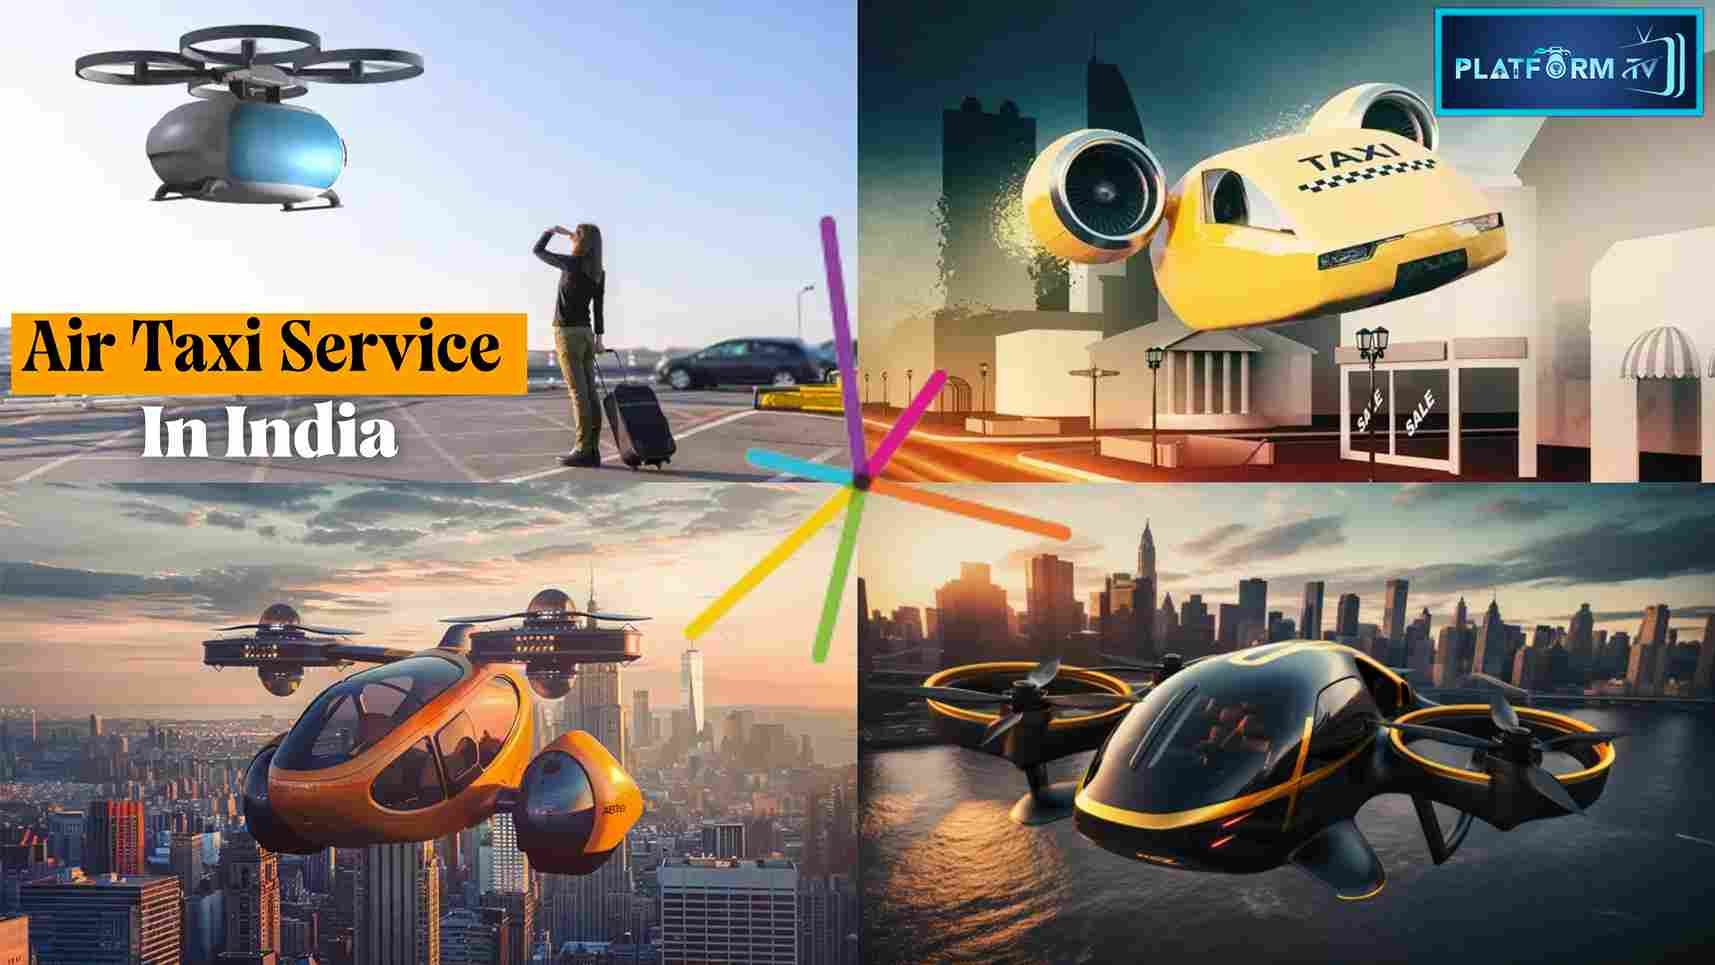 Air Taxi Service In India By 2026 - Platform Tamil